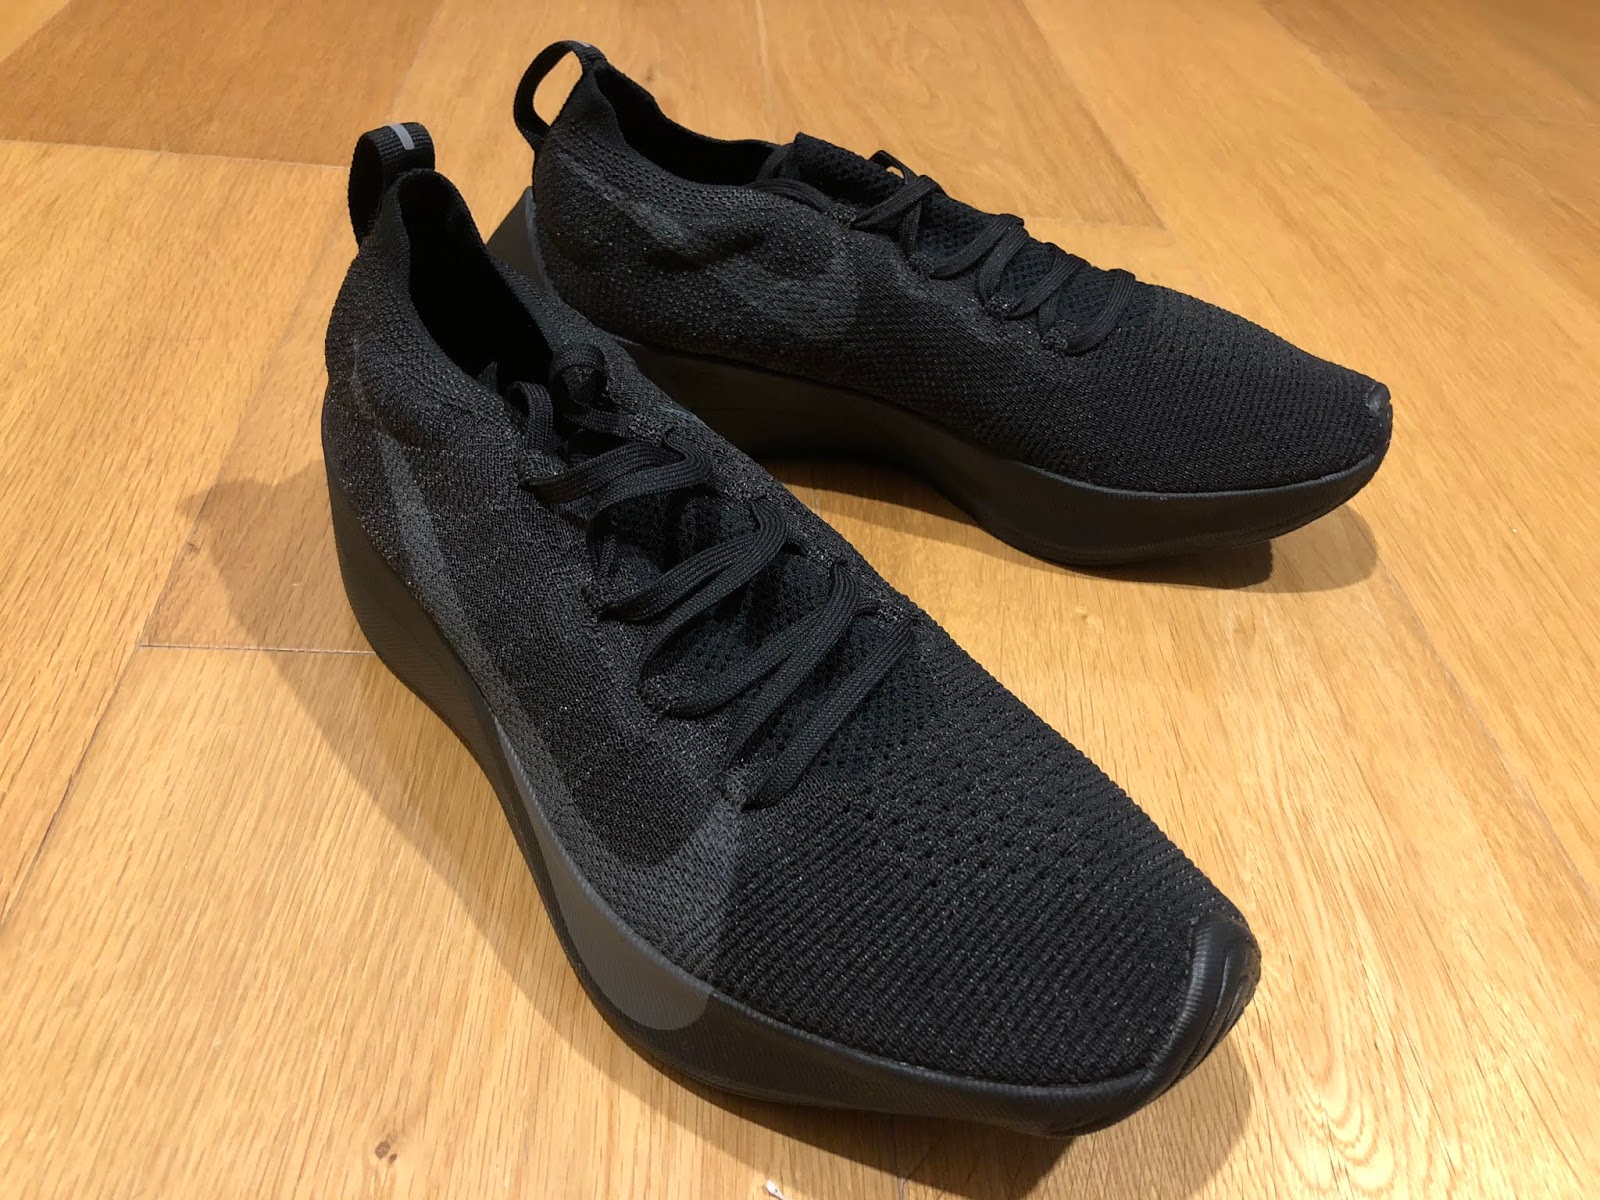 REVIEW: Nike Street